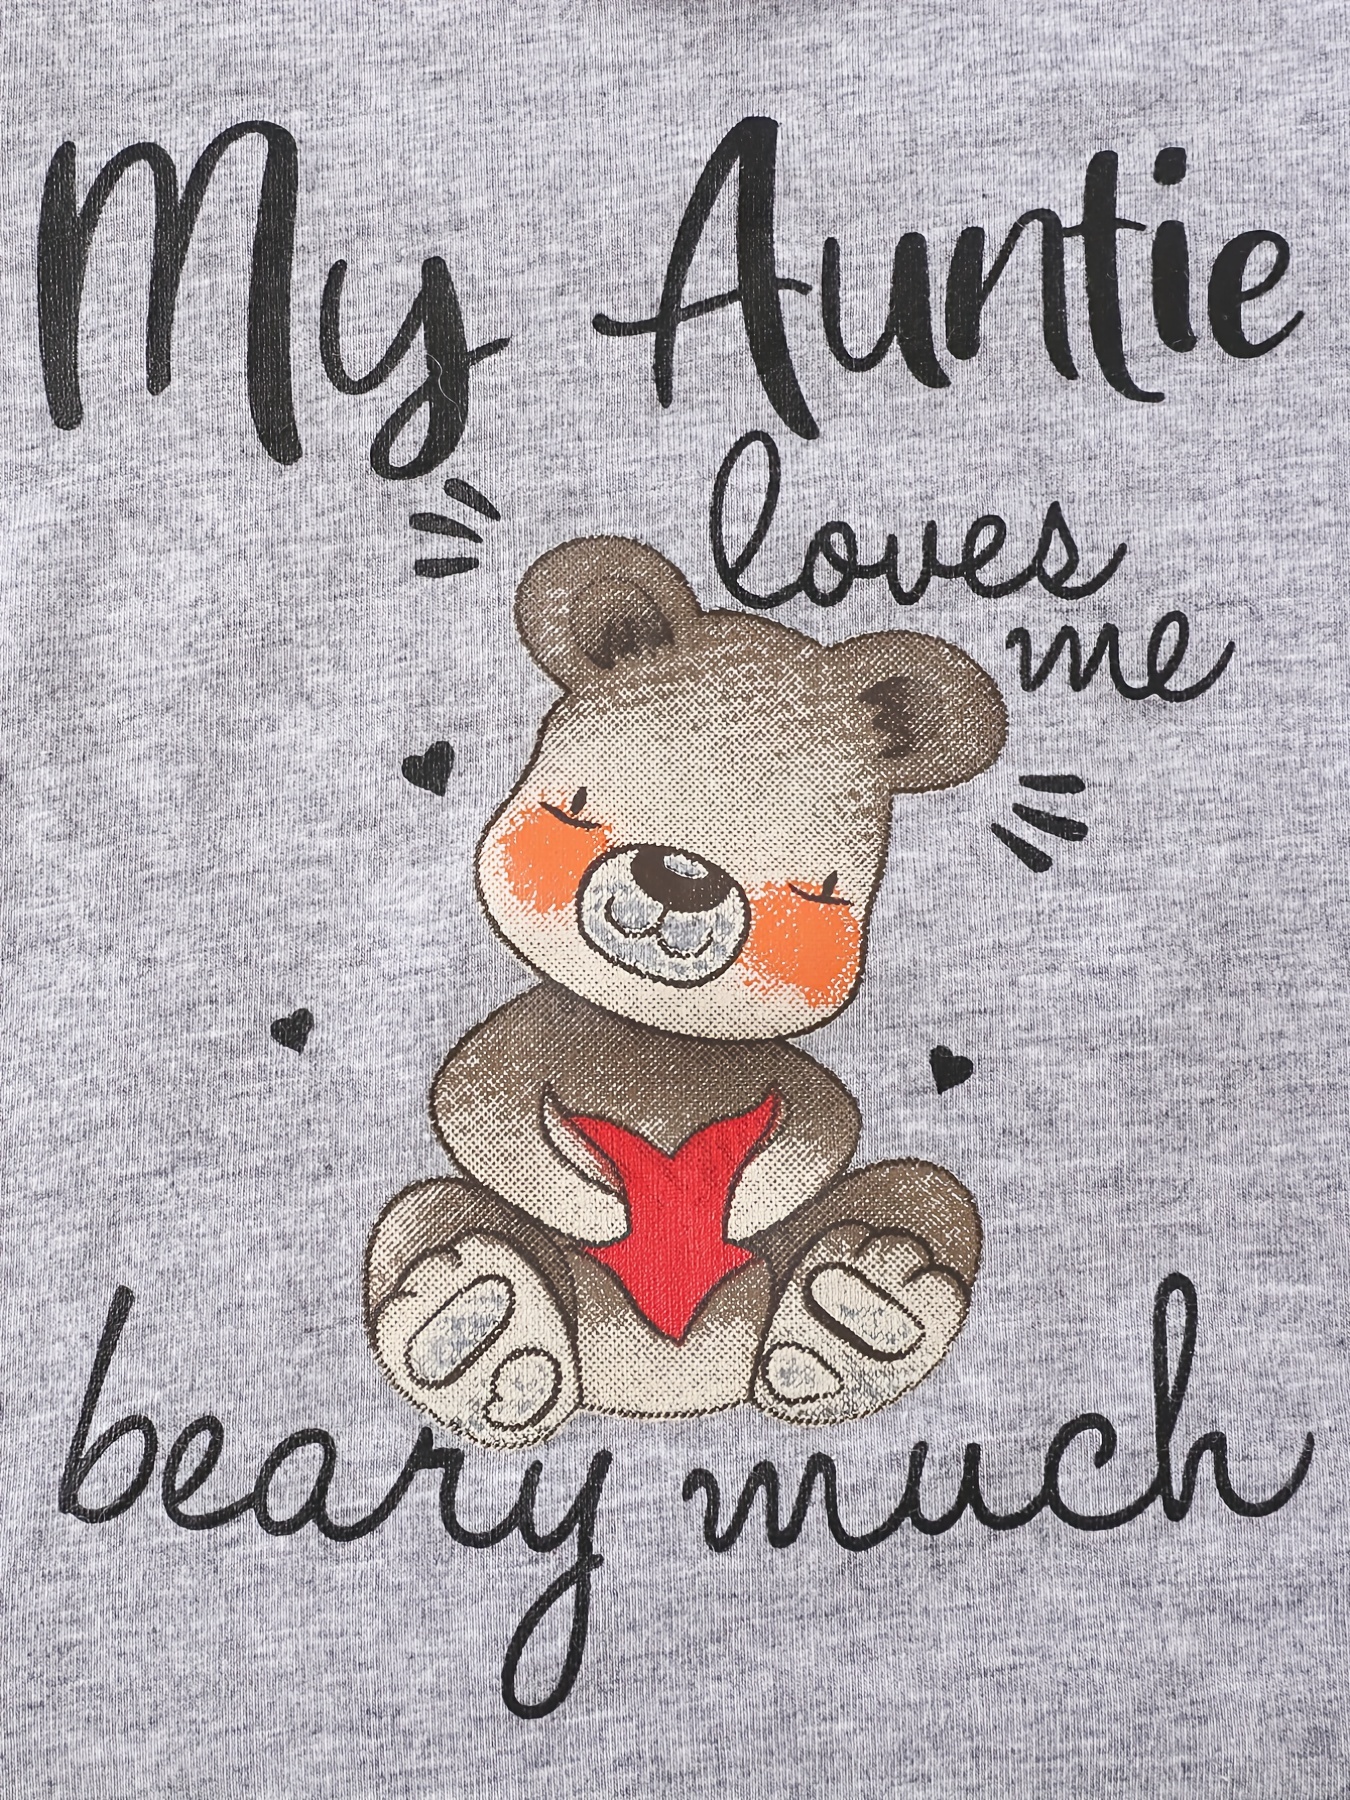 Baby Boys Girls Casual  Auntie Loves Beary Much Short - Temu Canada